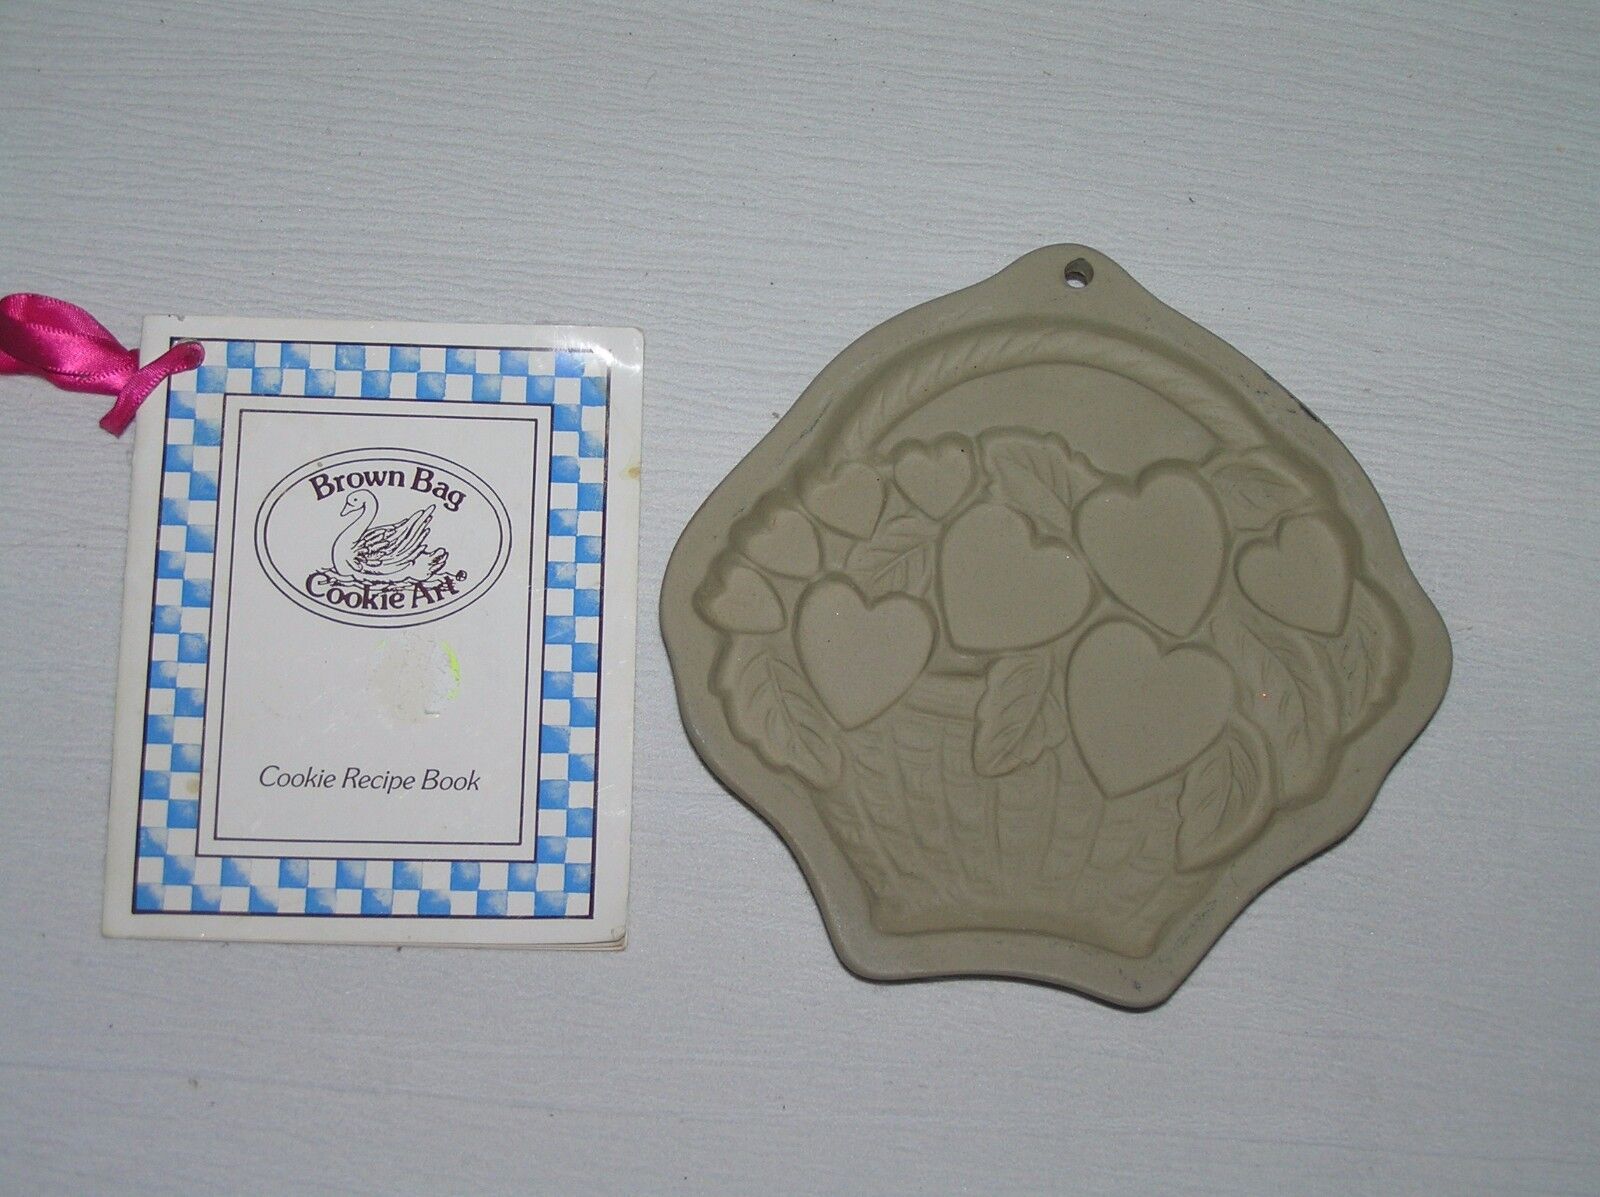 Brown Bag Cookie Art Hill Design 1992 Basket Full of Hearts Mold & Cookie Recipe